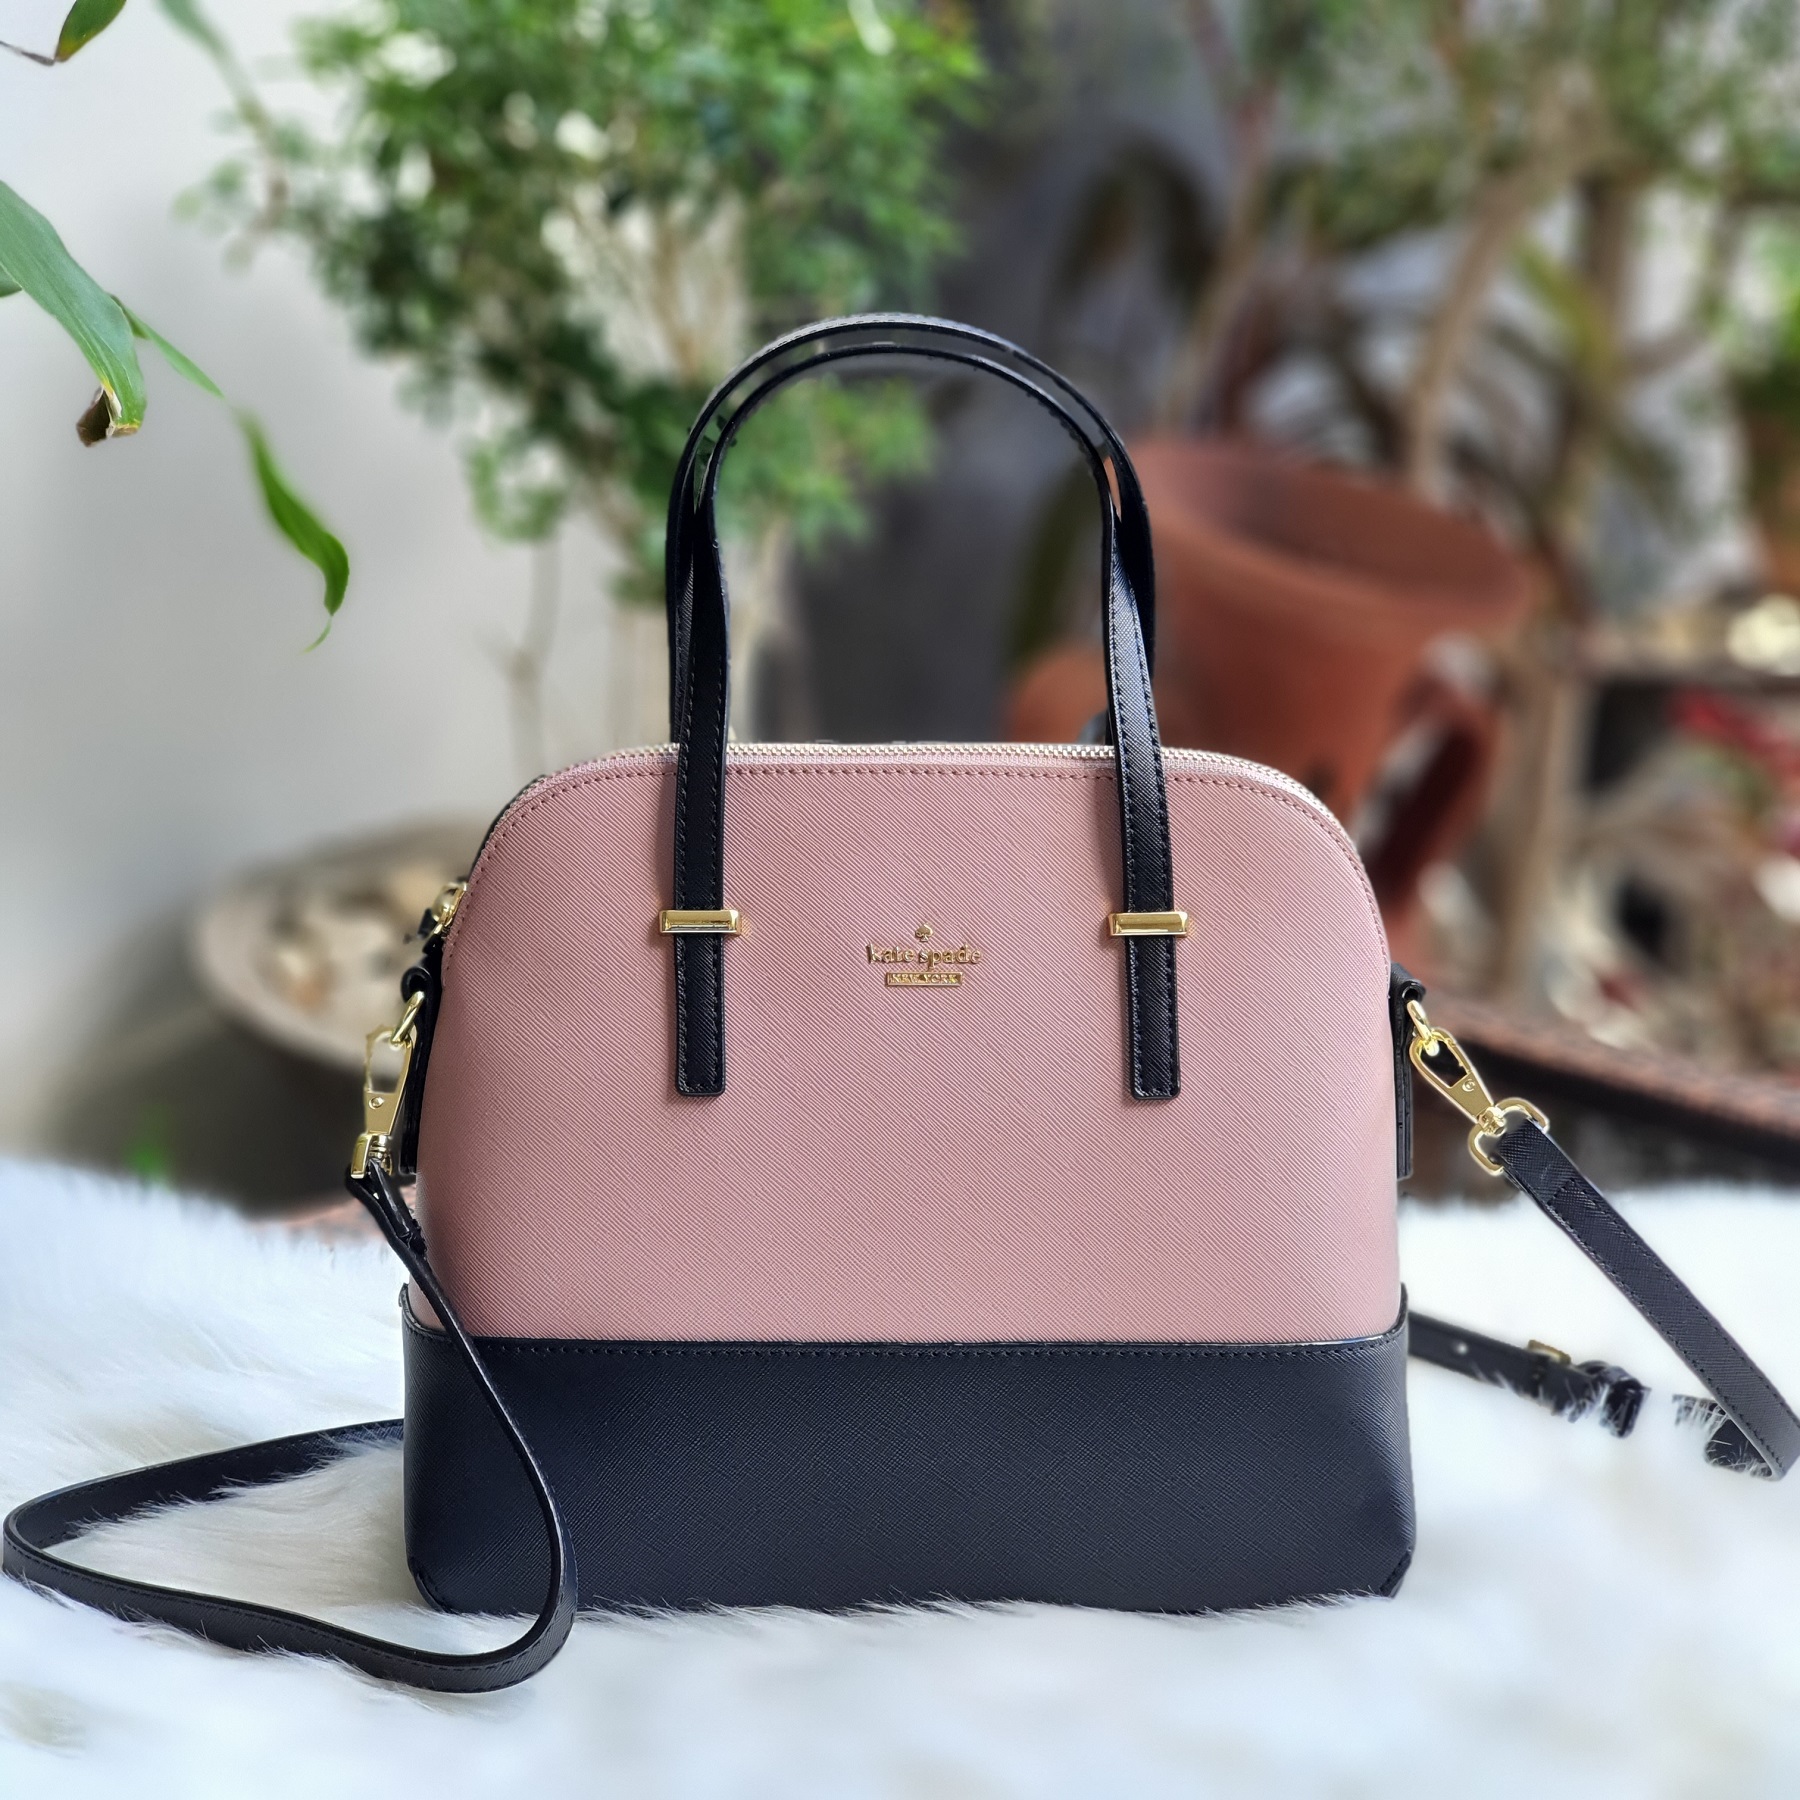 Kate Spade Maise Cross Body Bag in Pink